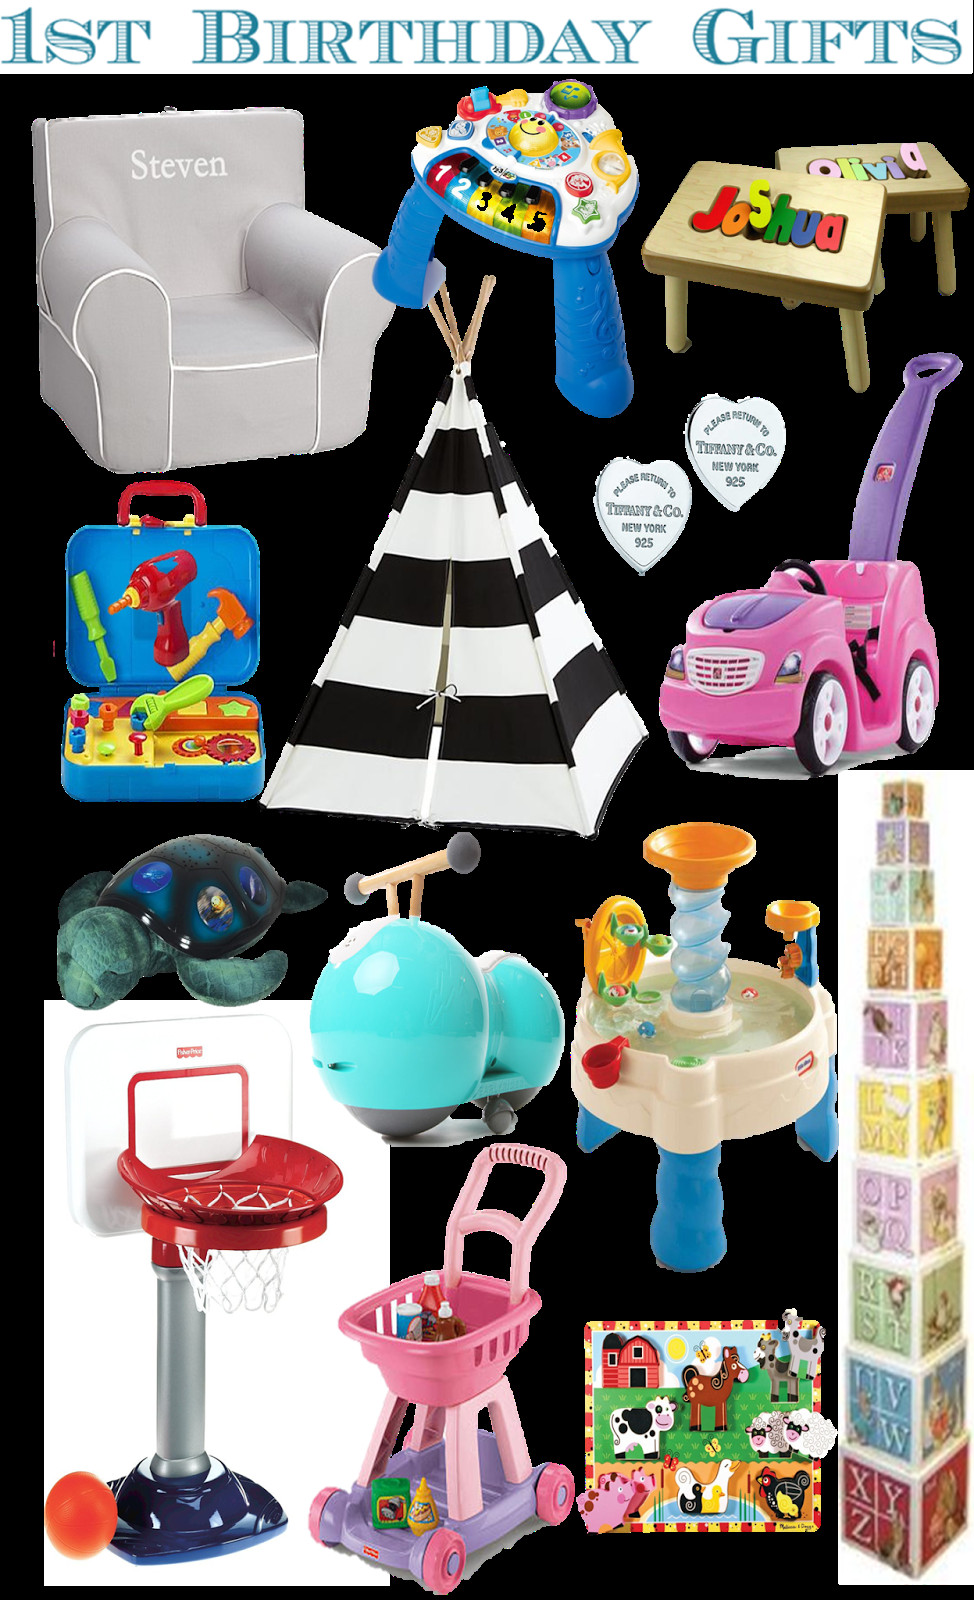 Toddler Boys Gift Ideas
 rnlMusings Gift Guide 1st Birthday Gifts